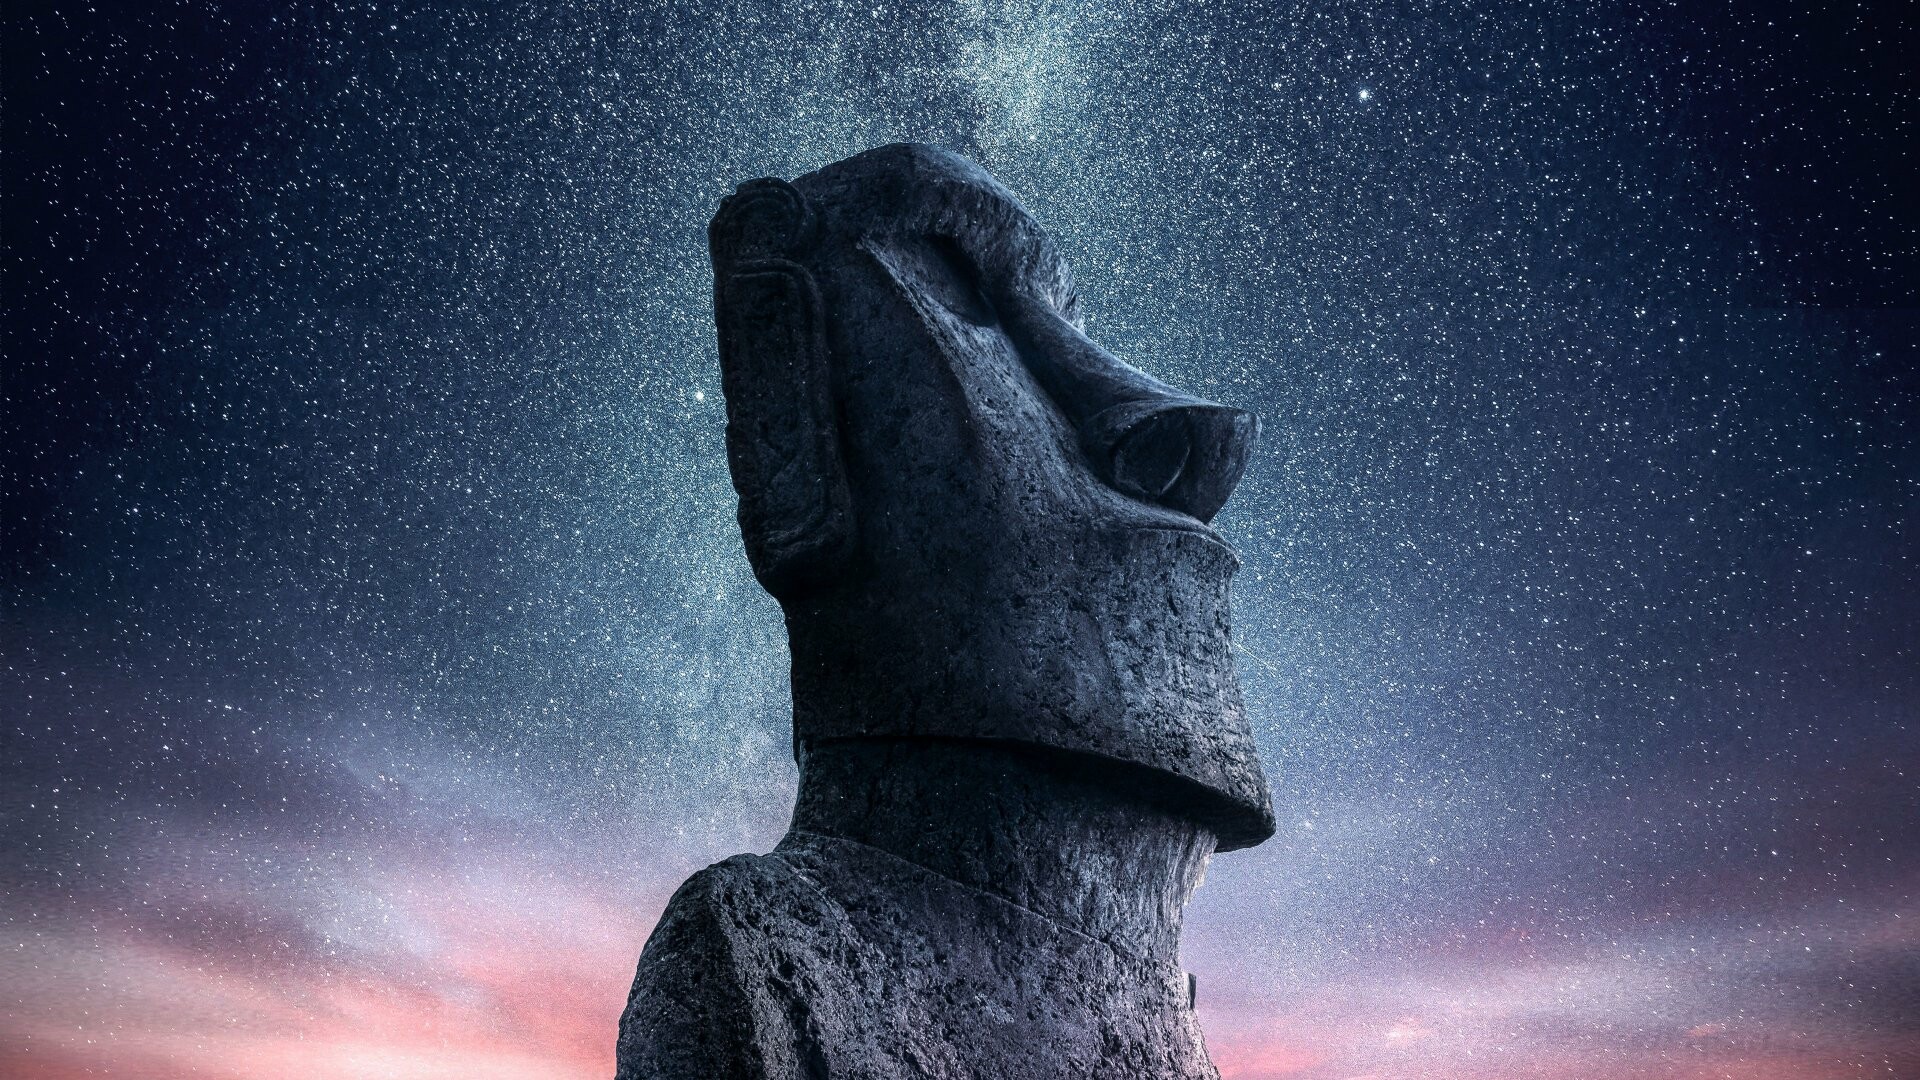 Moai: The statues are part of the Rapa Nui National Park, a UNESCO World Heritage Site. 1920x1080 Full HD Wallpaper.